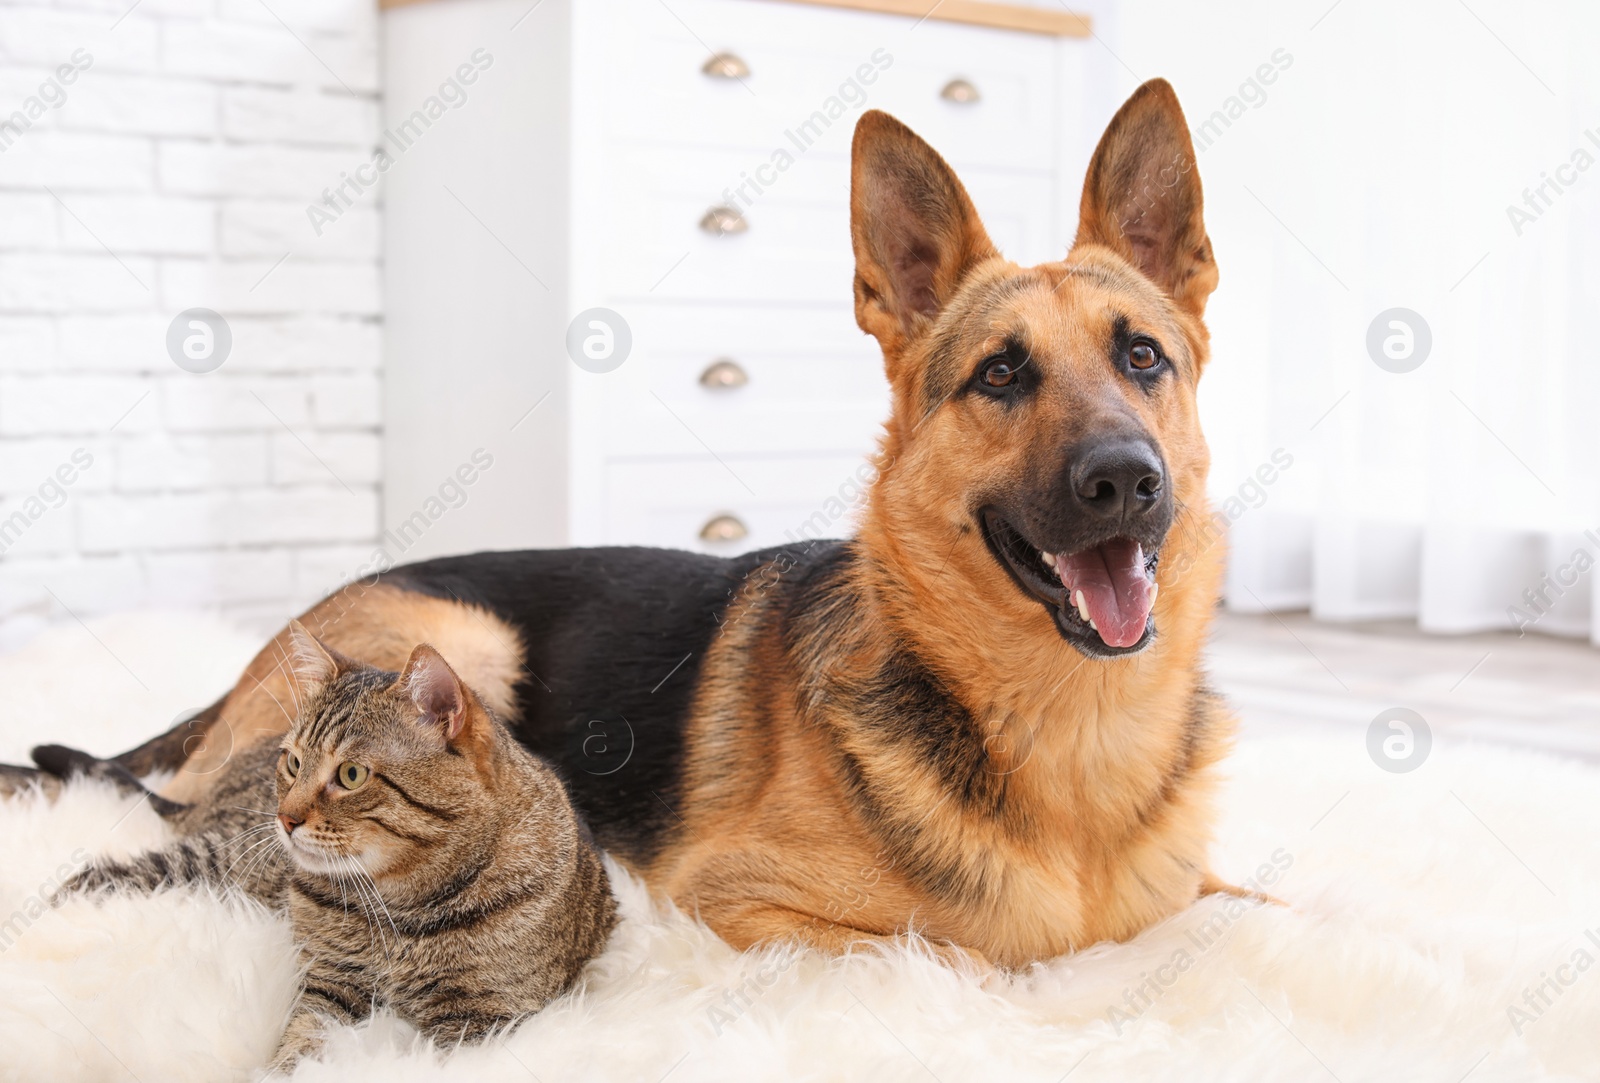 Photo of Adorable cat and dog resting together on fuzzy rug indoors. Animal friendship